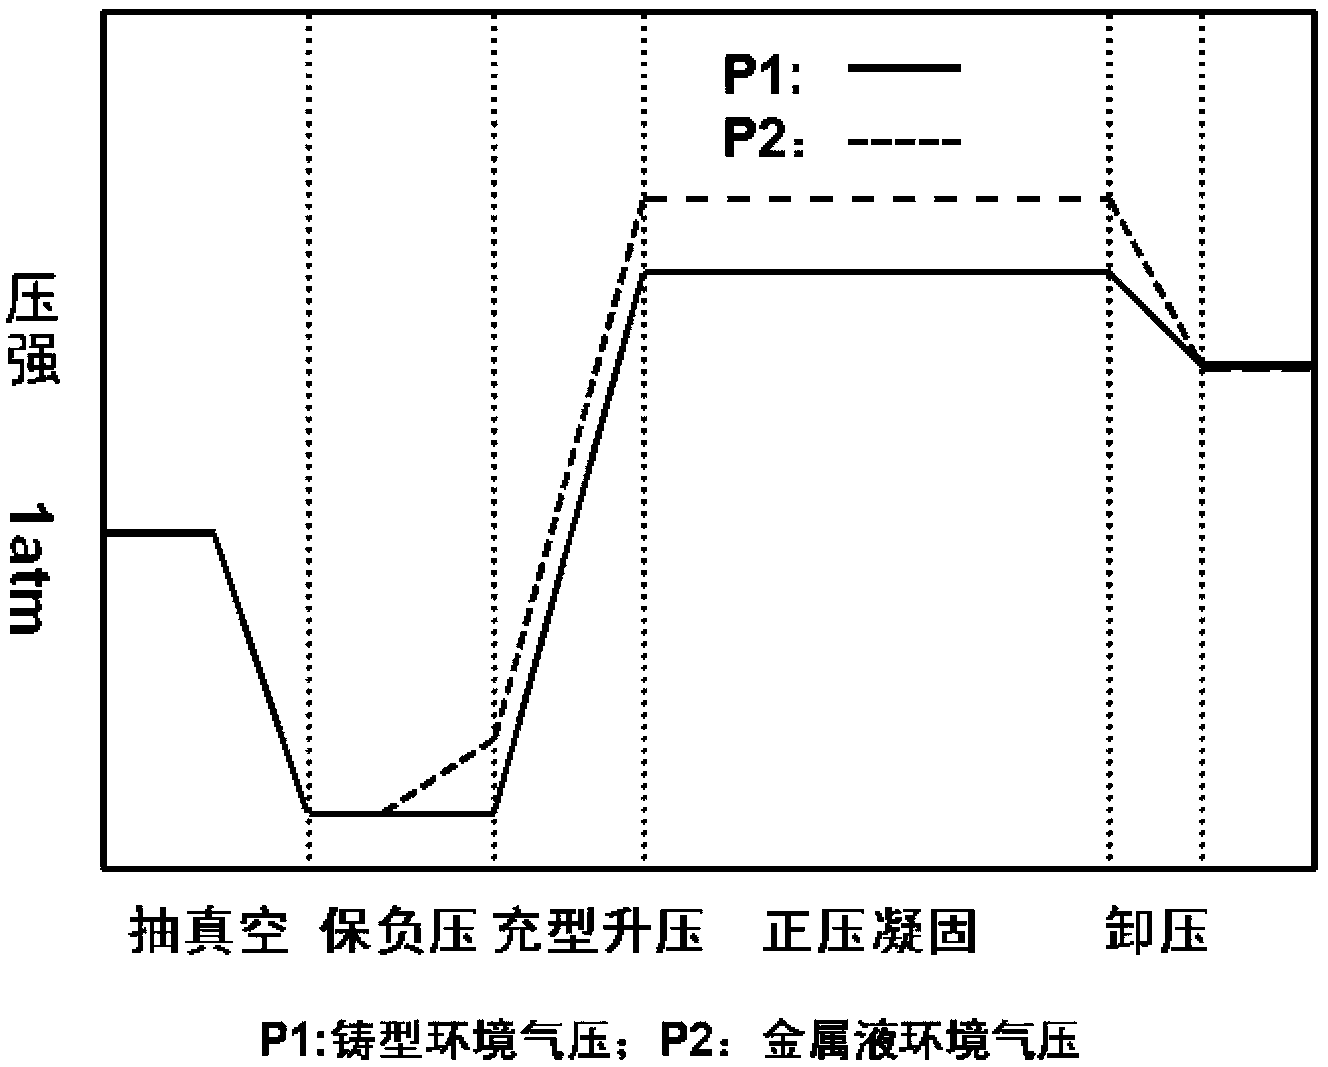 Precesion casting method for high temperature alloy complex thin-walled castings